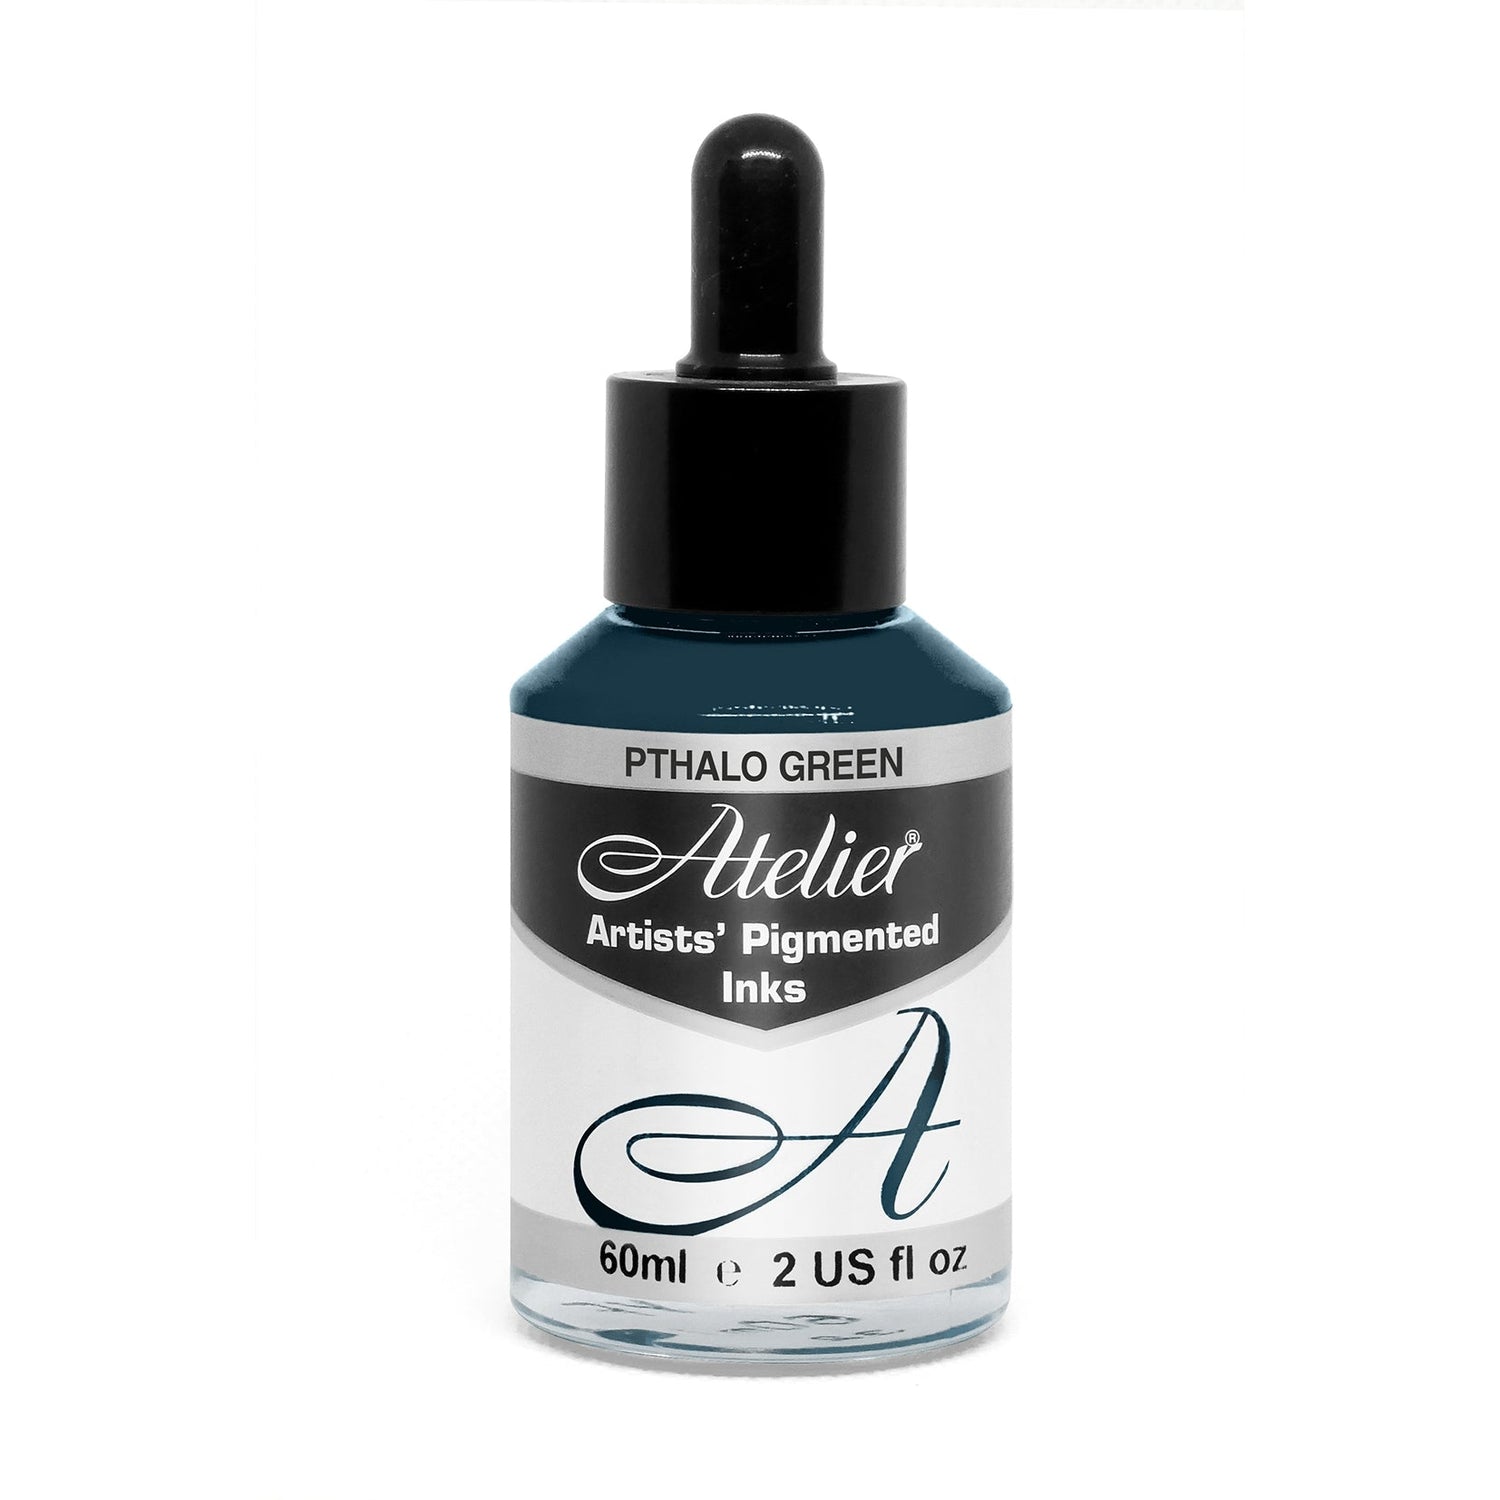 Atelier Artist Pigmented Ink 60ml Phthalo Green - theartshop.com.au